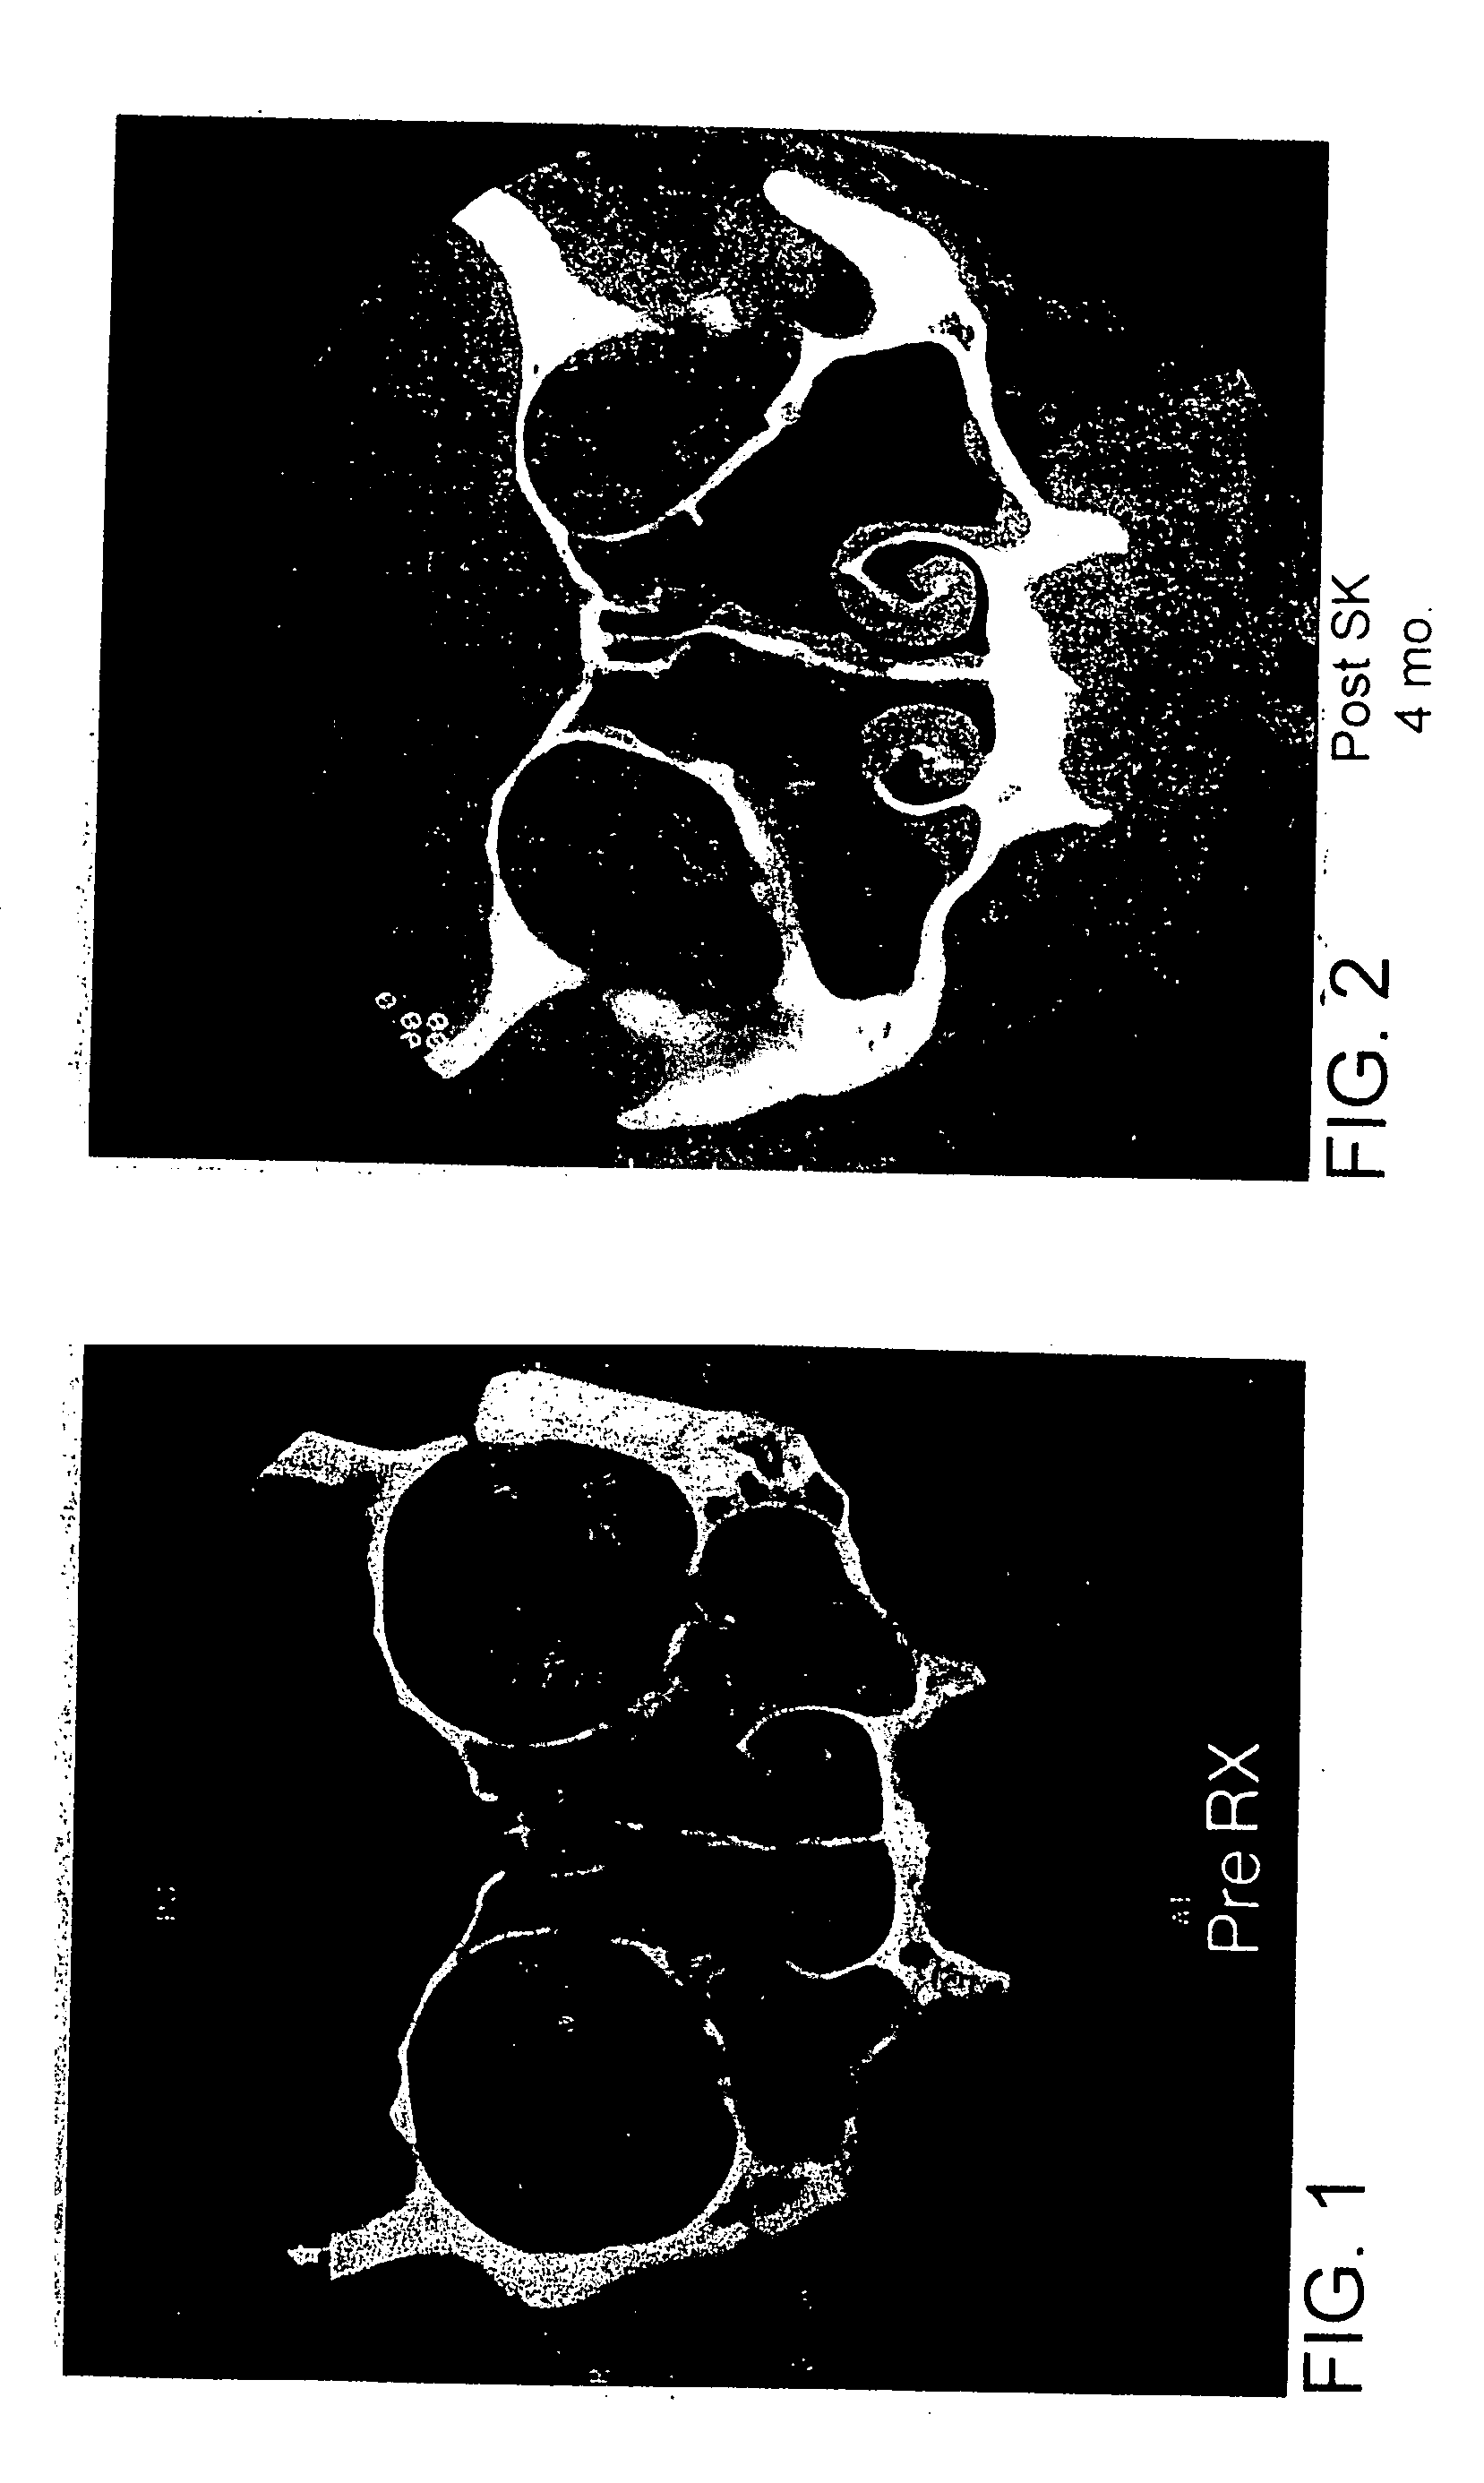 Methods and materials for treating and preventing inflammation of mucosal tissue